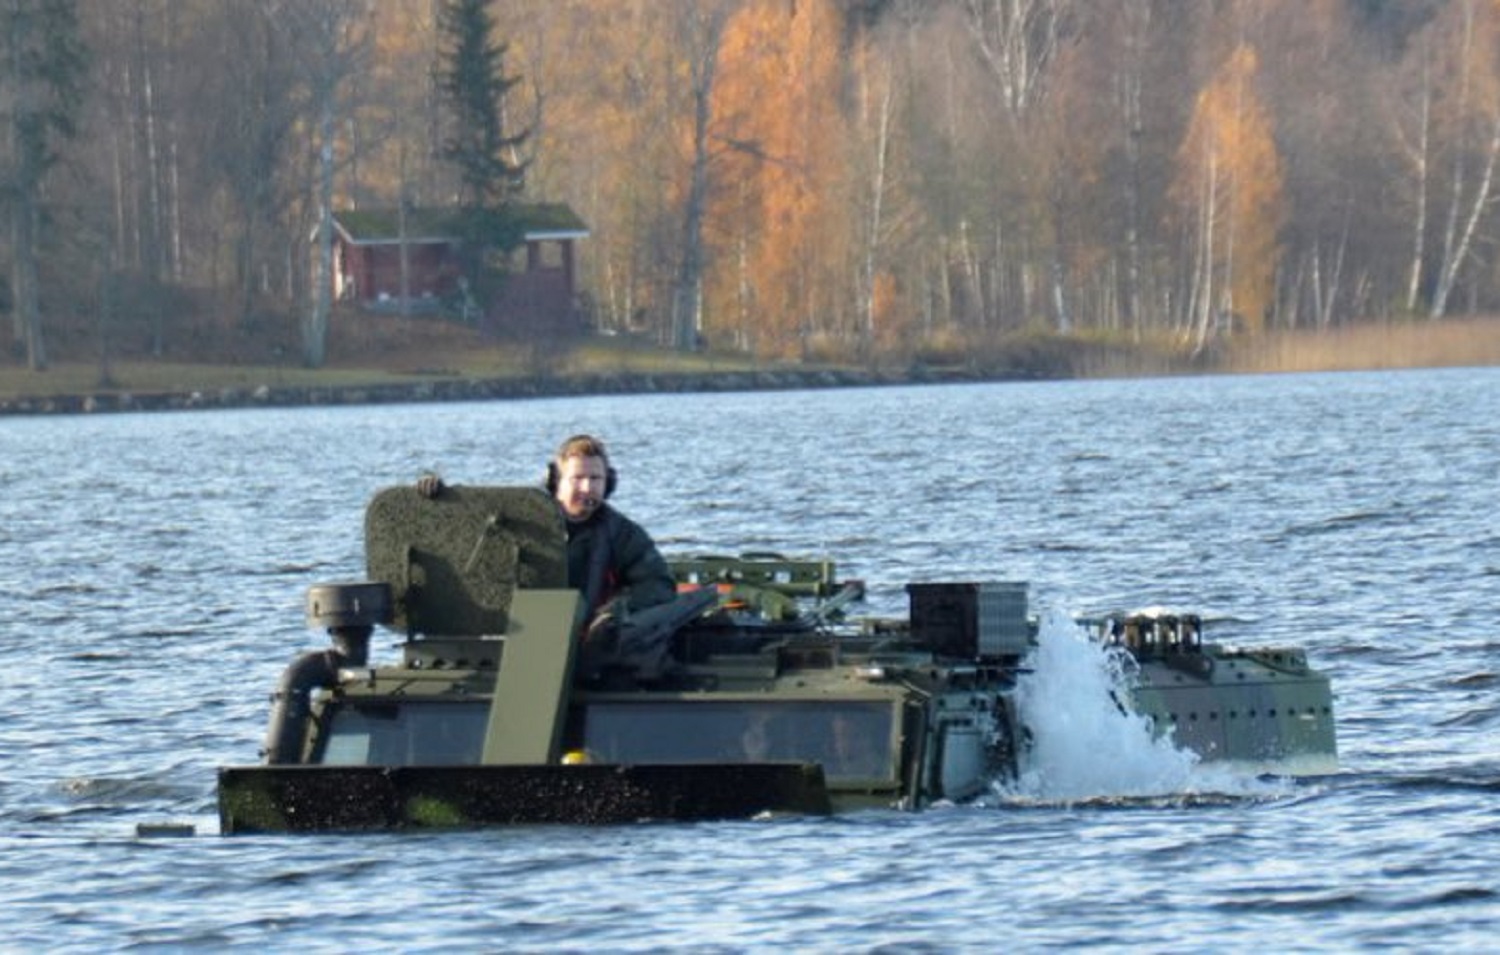 Protolab PMPV in further amphibious testing in Finland with excellent results.